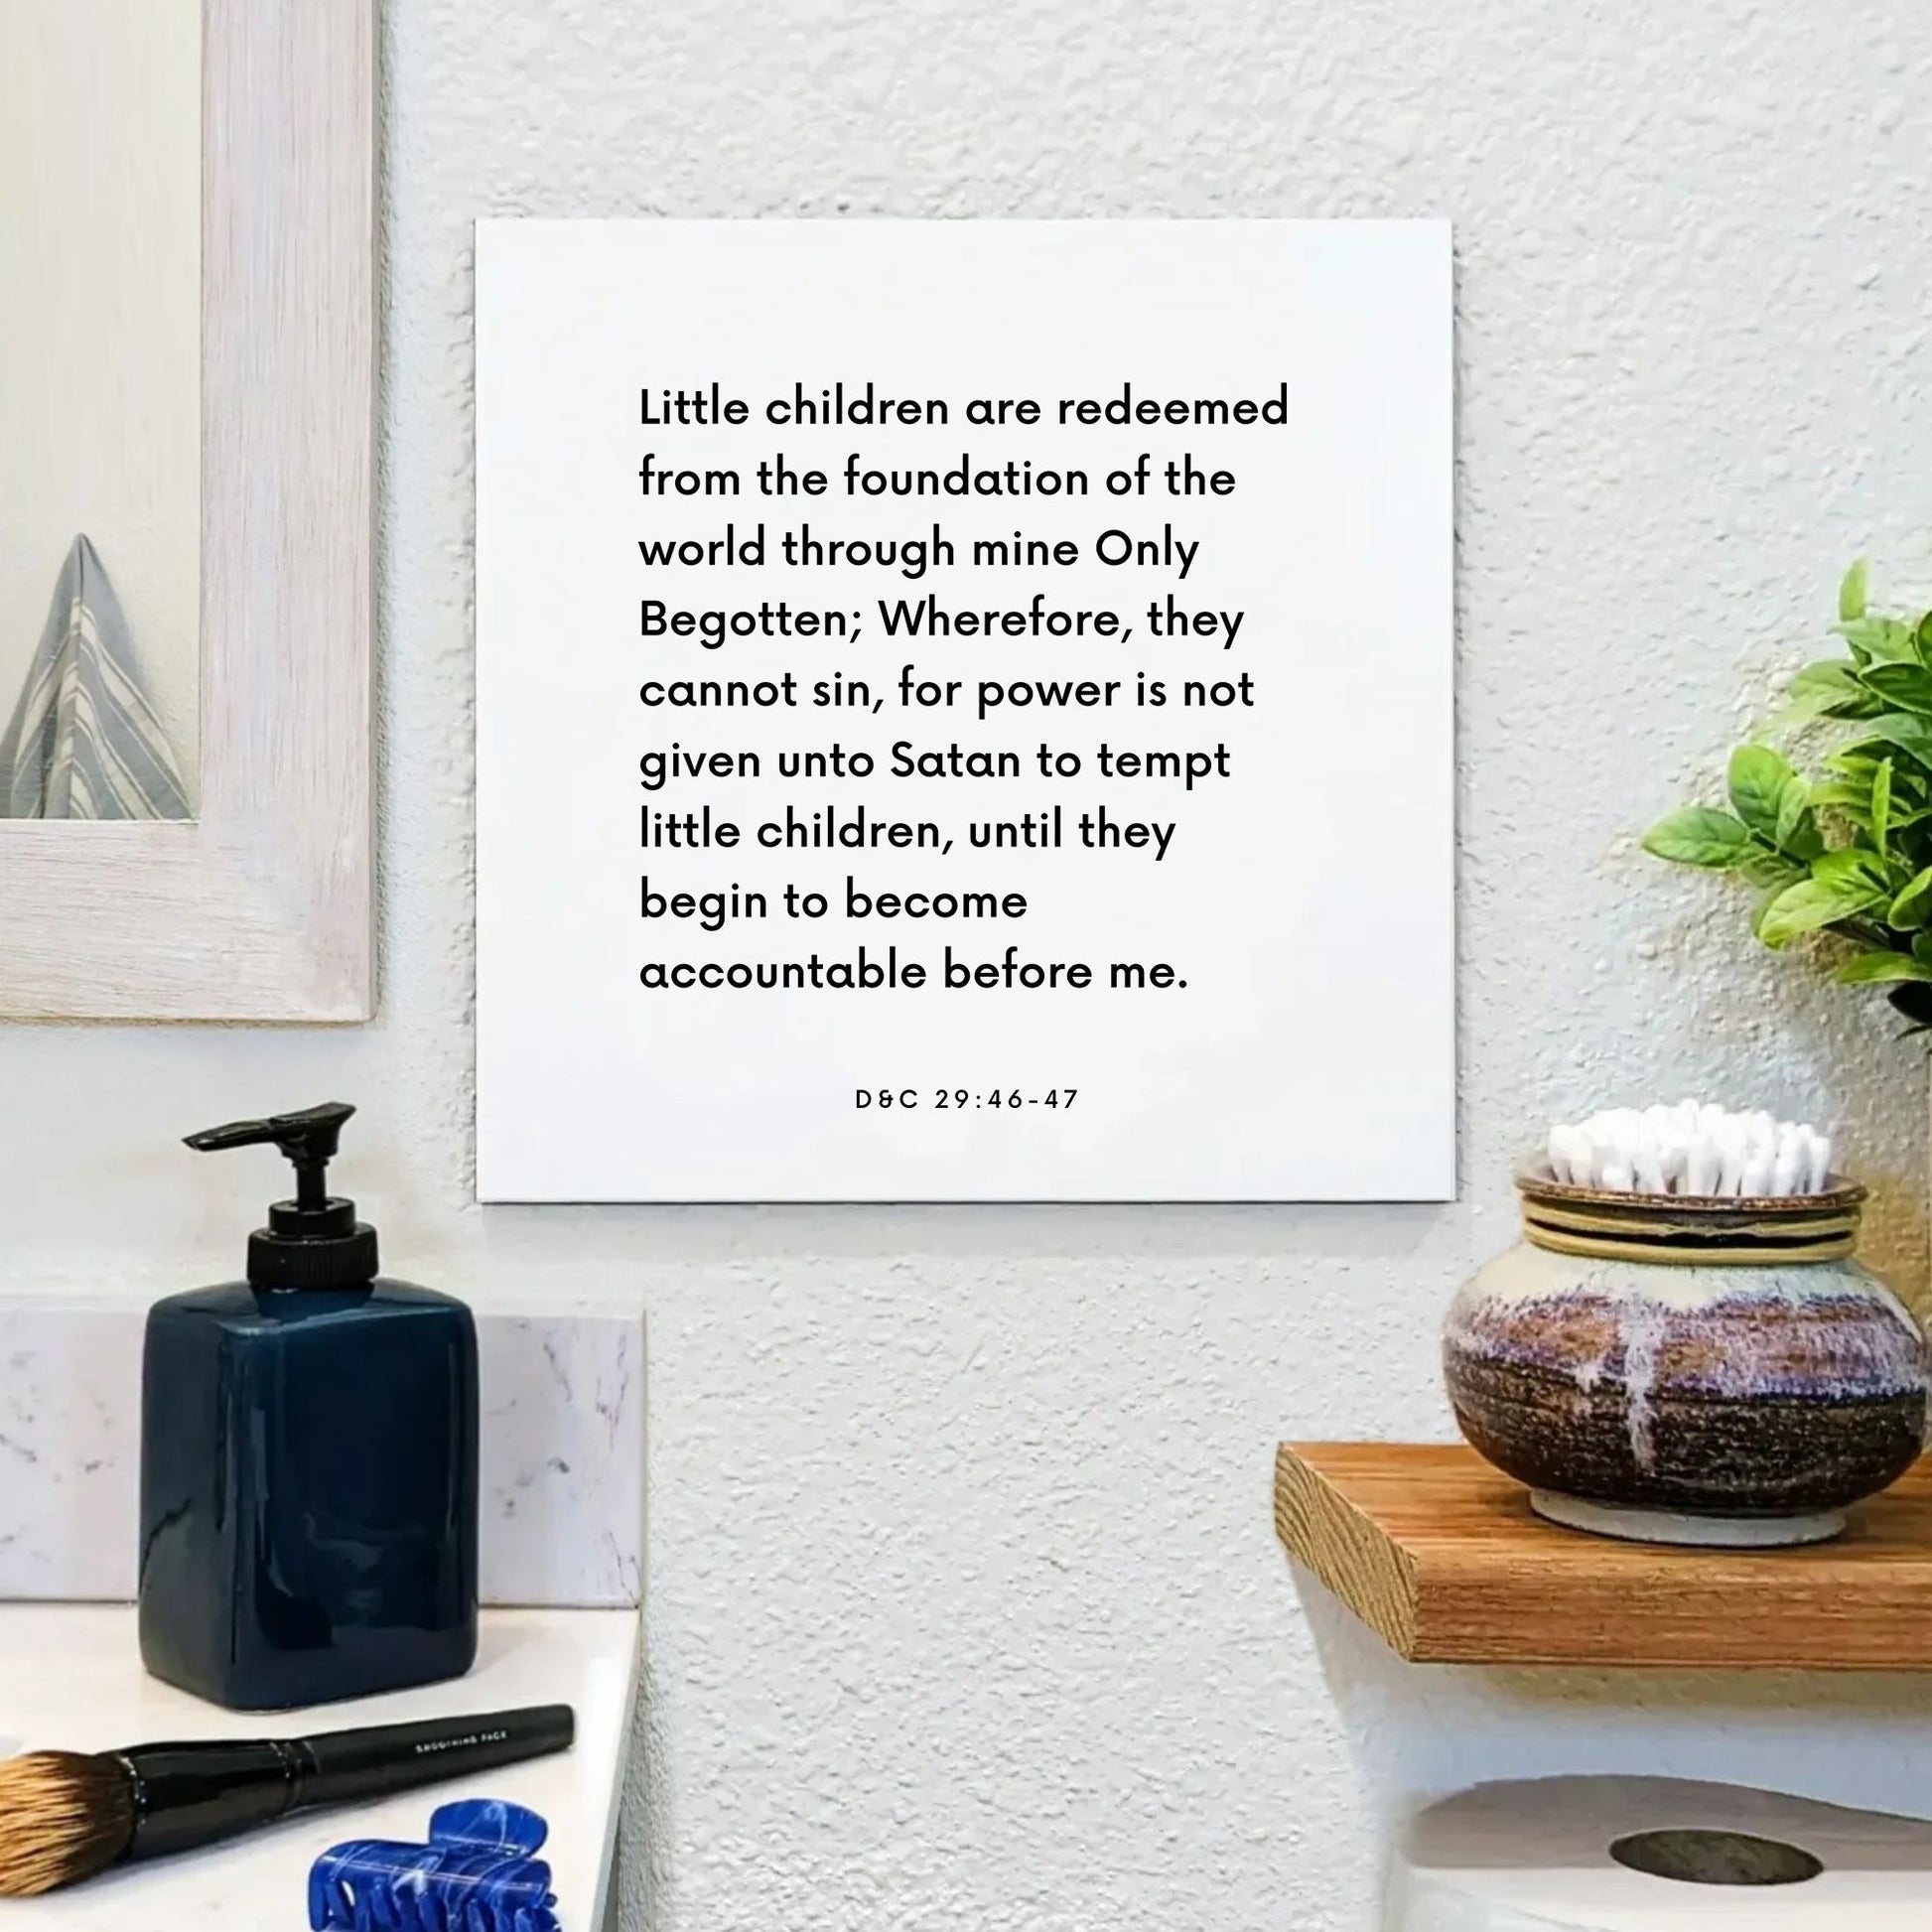 Bathroom mouting of the scripture tile for D&C 29:46-47 - "Little children are redeemed through mine Only Begotten"